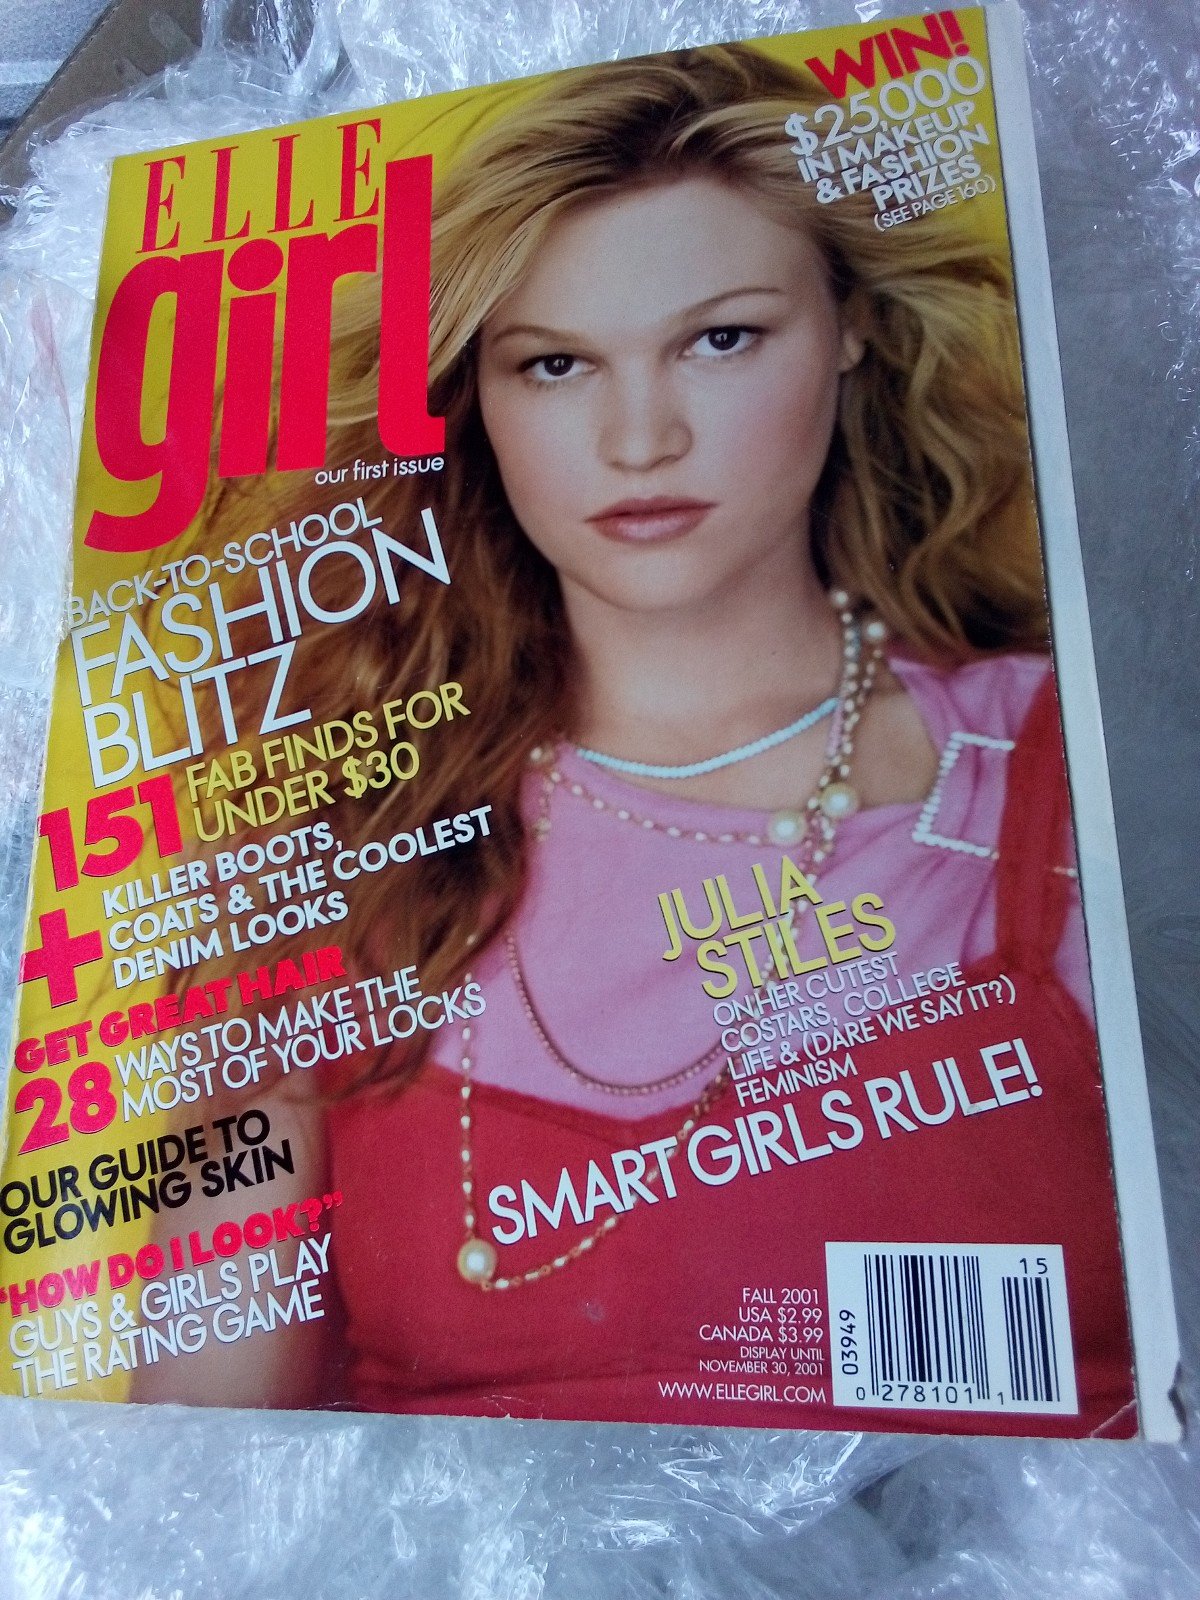 ELLE GIRL Magazine FIRST ISSUE fall 2001 First Edition 4QJY1NuMg